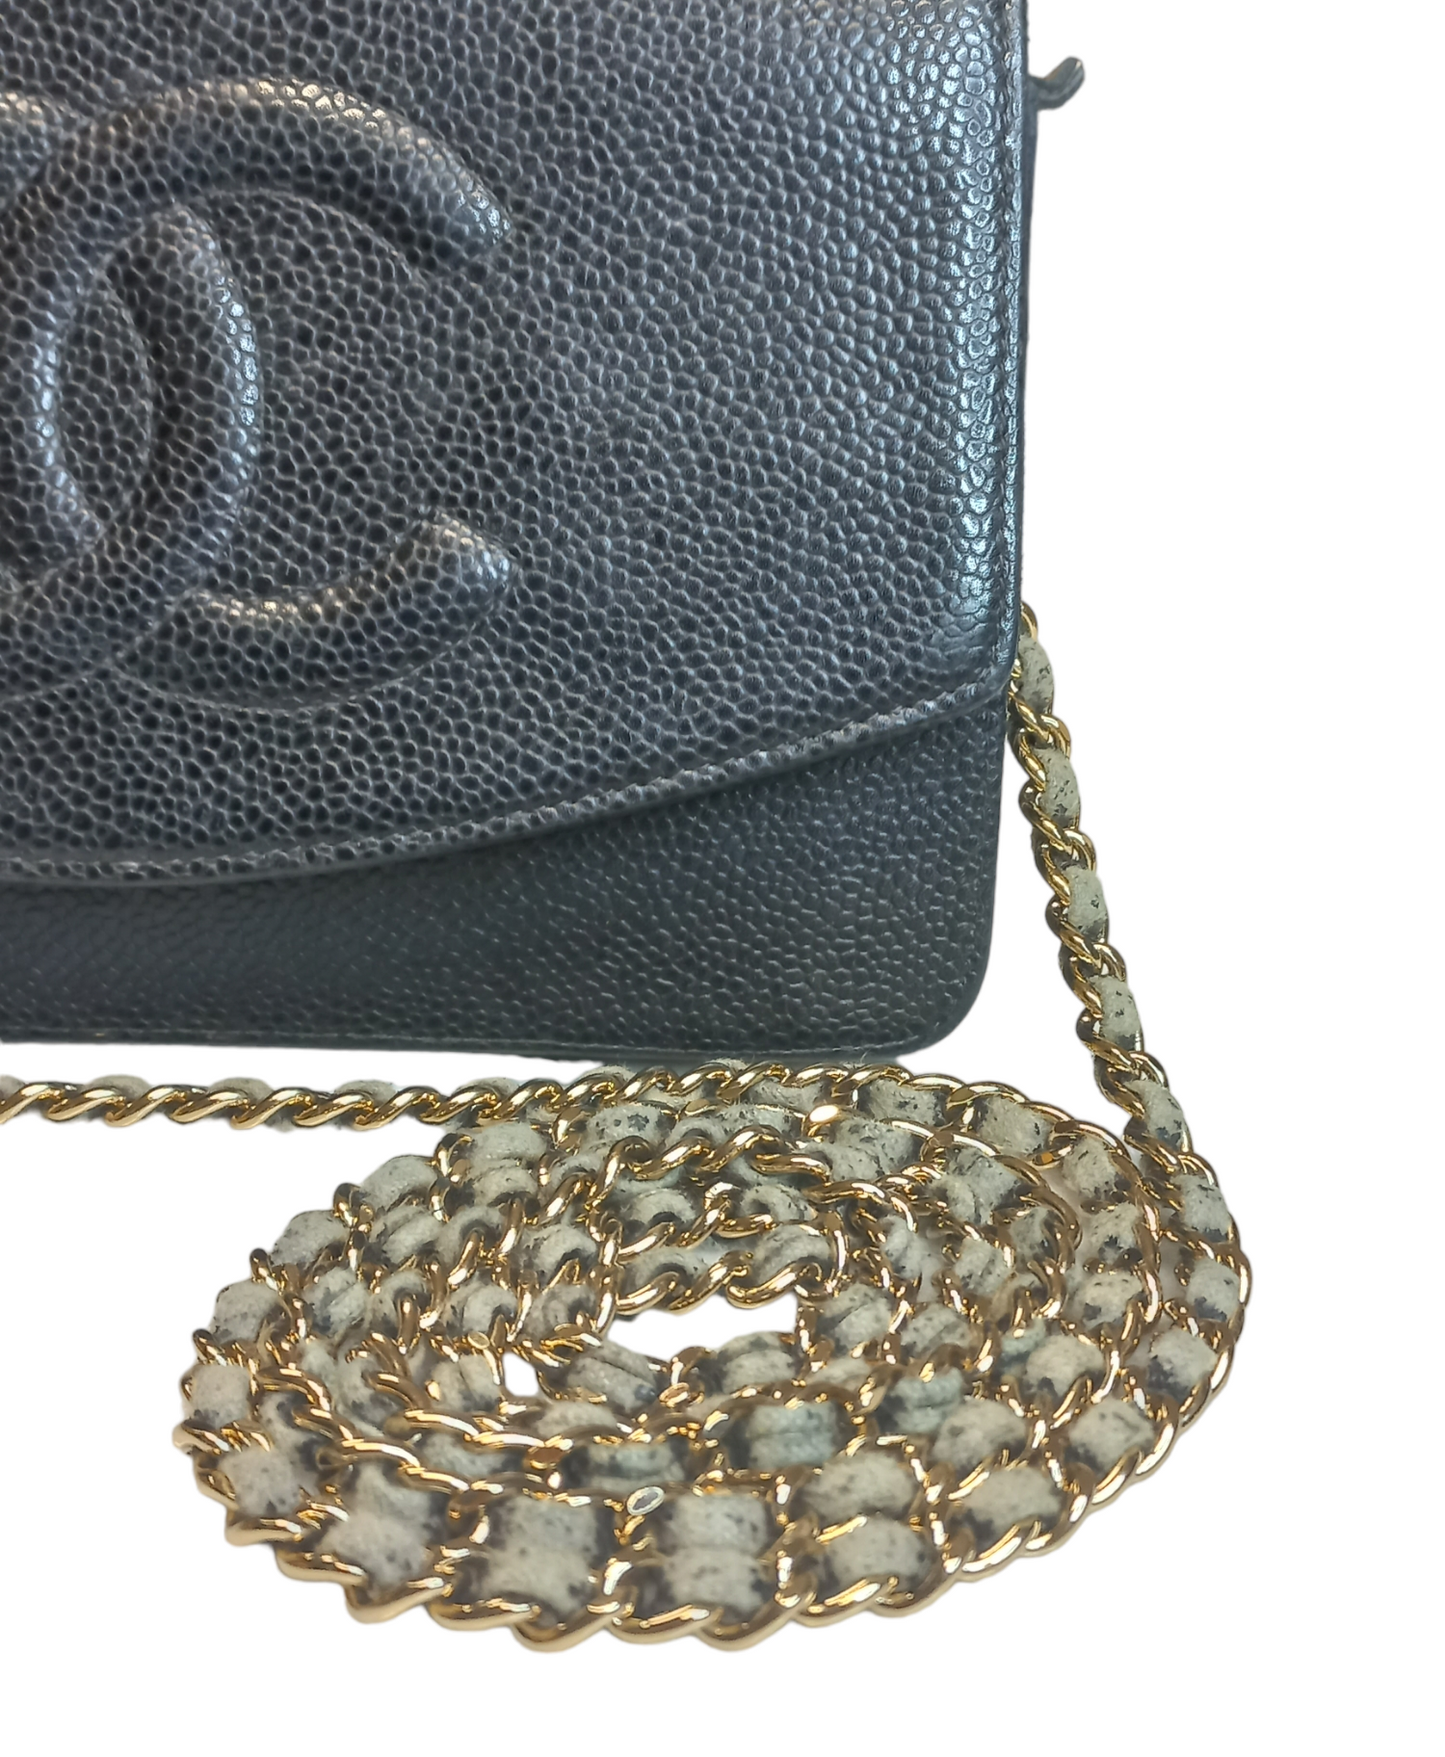 Chanel Timeless Wallet on Chain Caviar Black